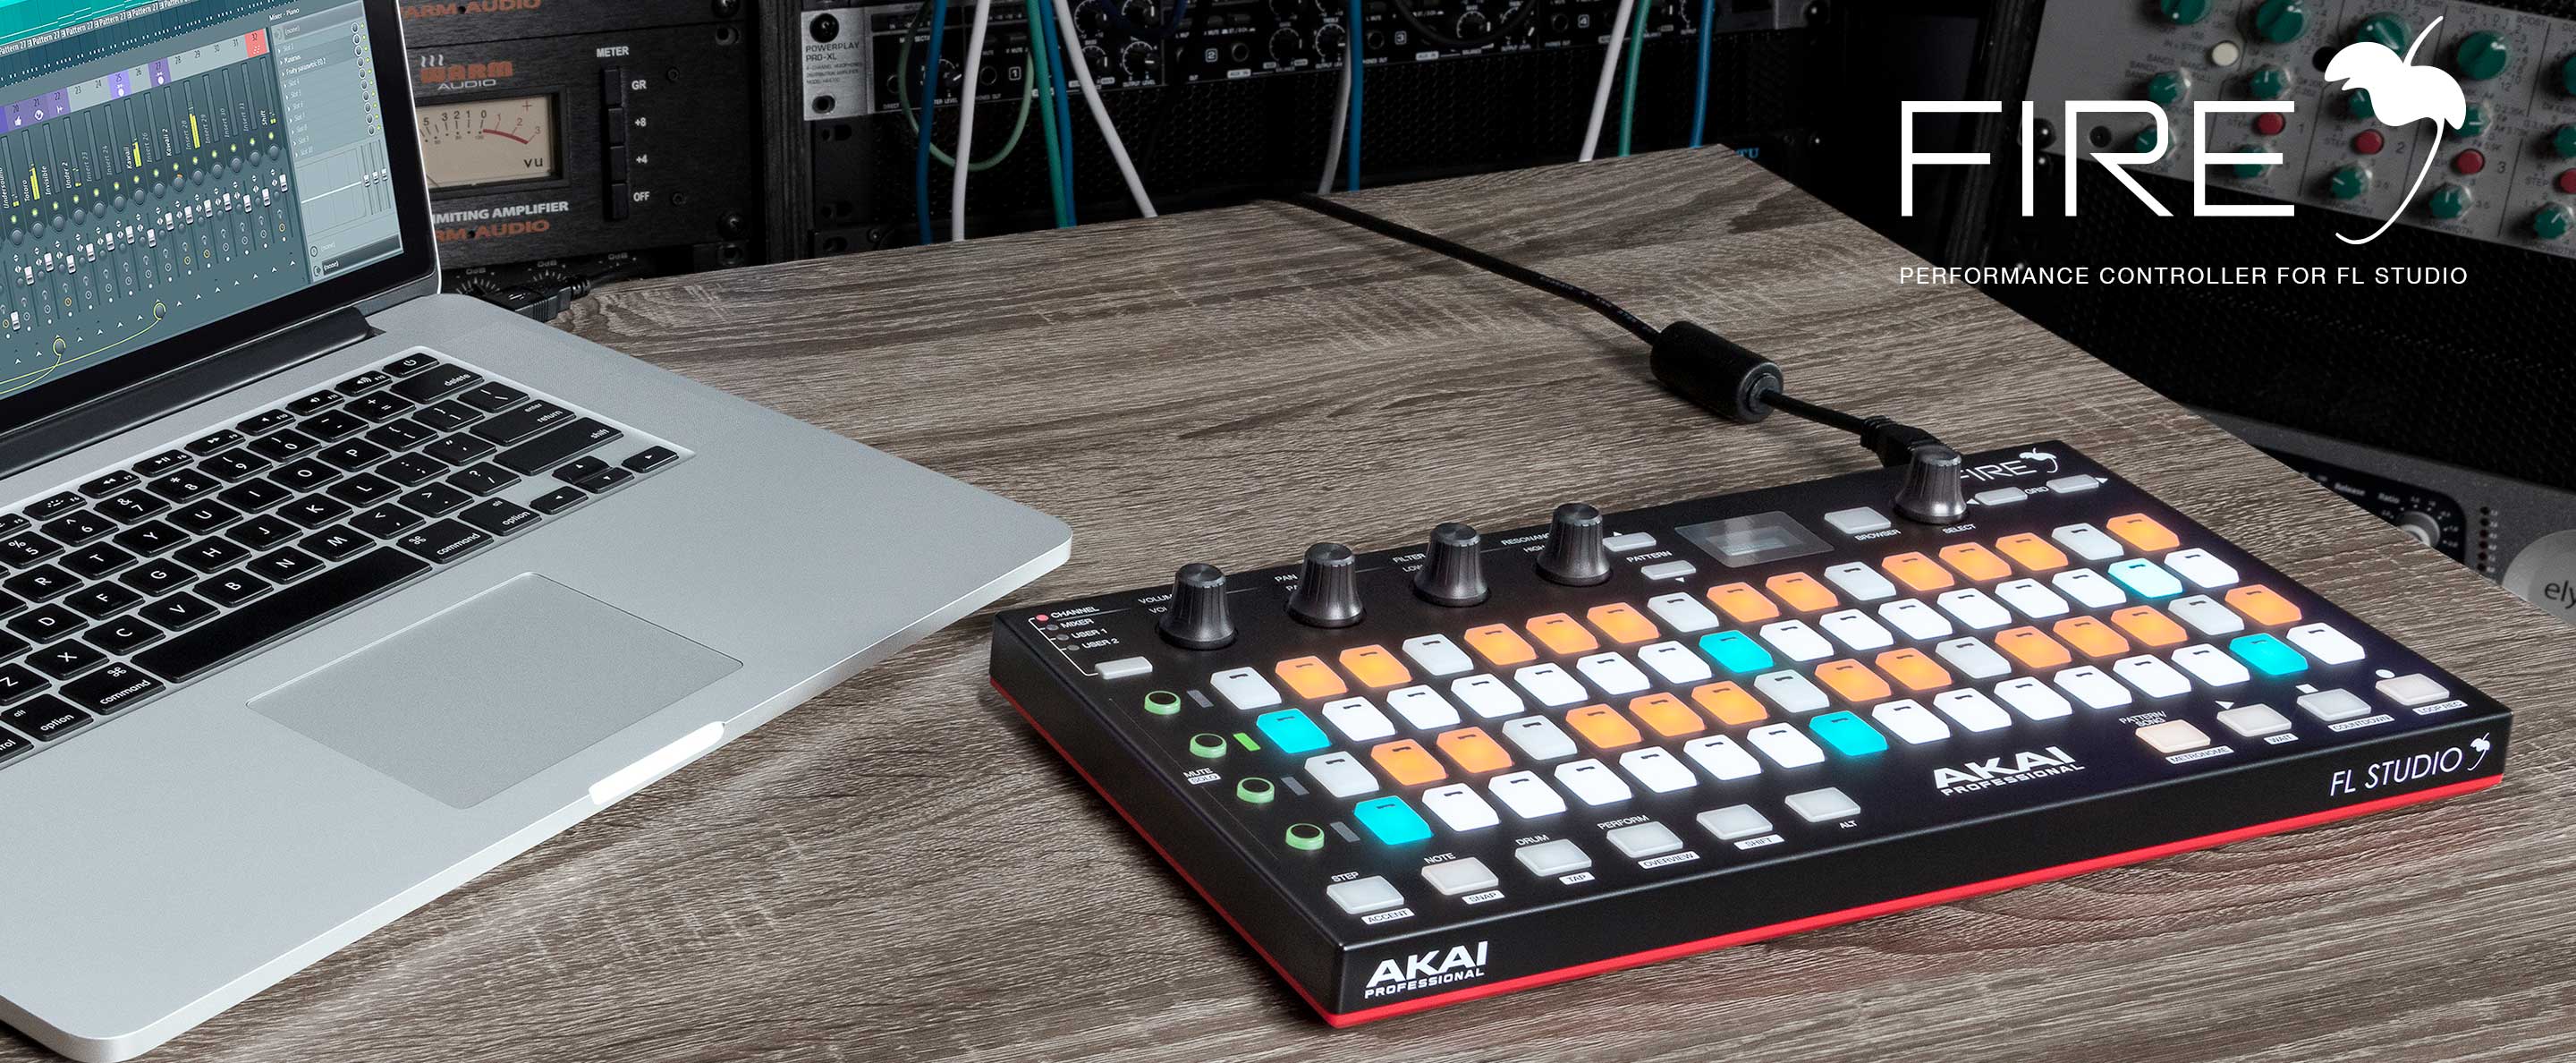 FL Studio’s first ever dedicated controller is here from Akai